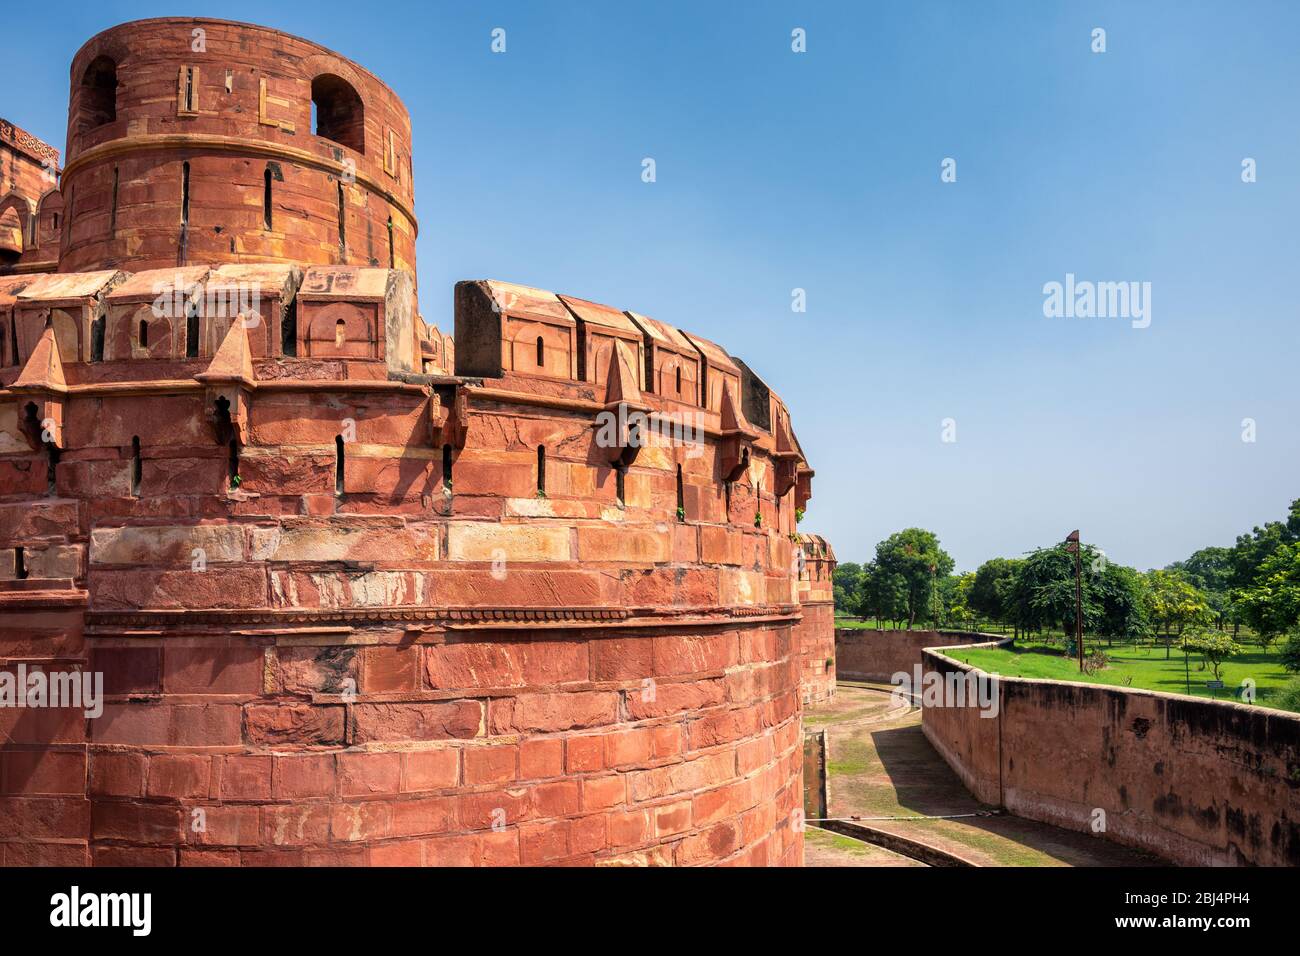 Historical Agra Fort of the Mughal dynasty emperors, UNESCO World Heritage site in Agra, Uttar Pradesh, India Stock Photo